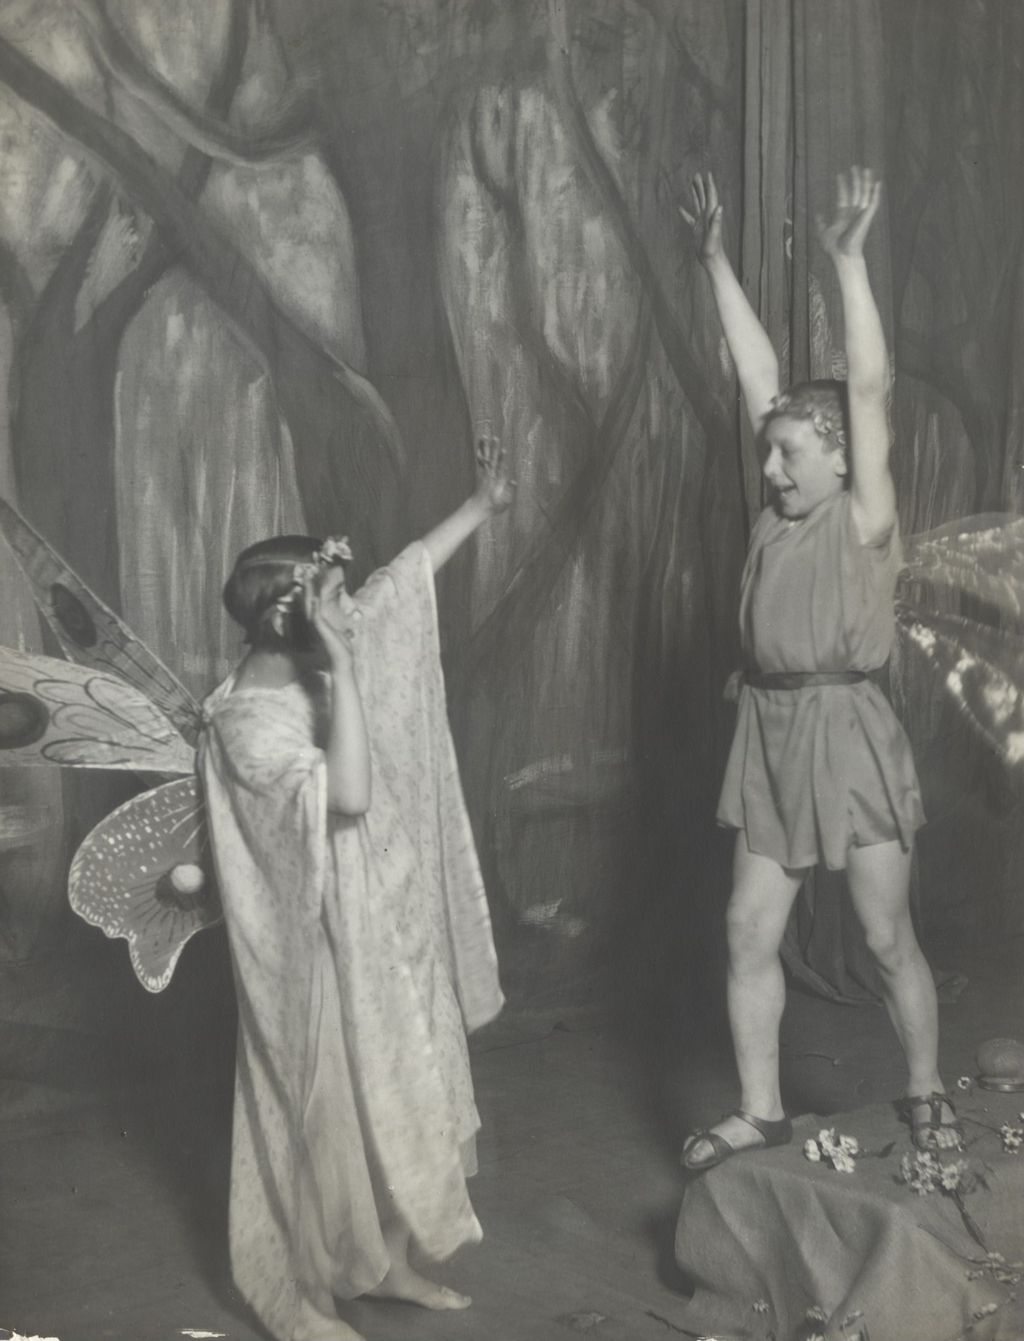 Miniature of Two young performers in "A Midsummer Night's Dream" production at Hull-House